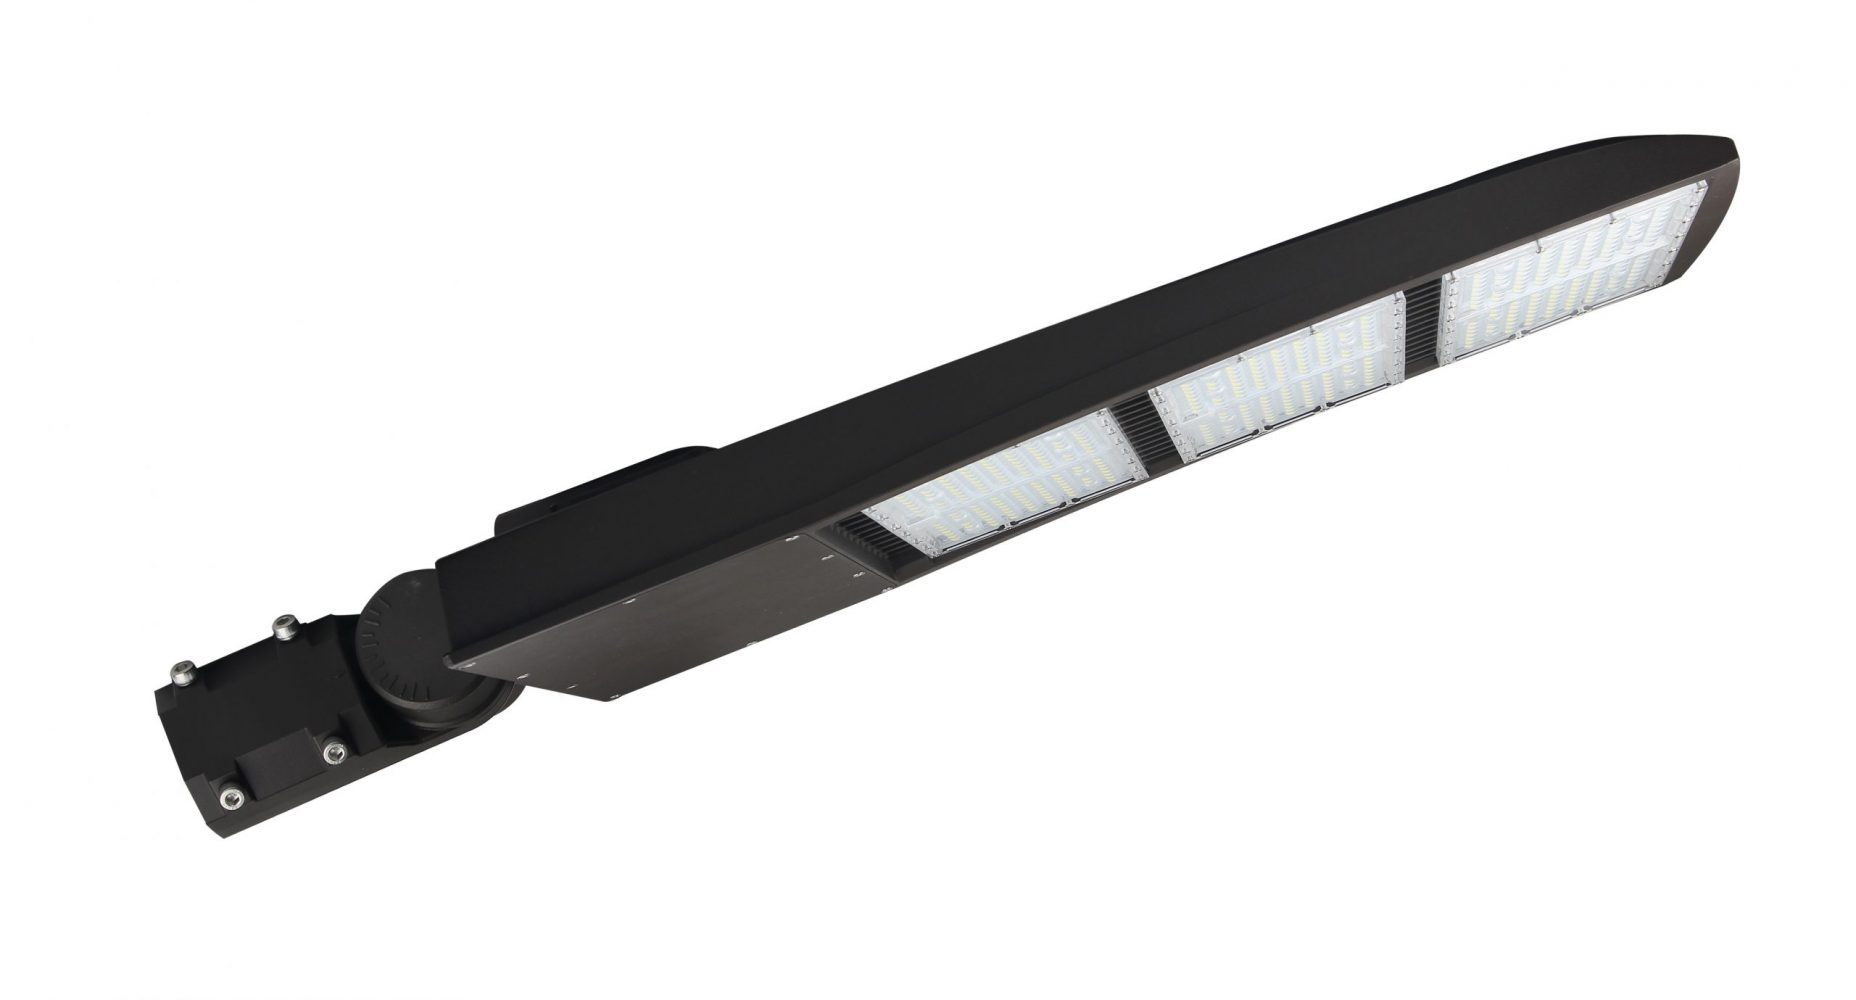 About LED street light